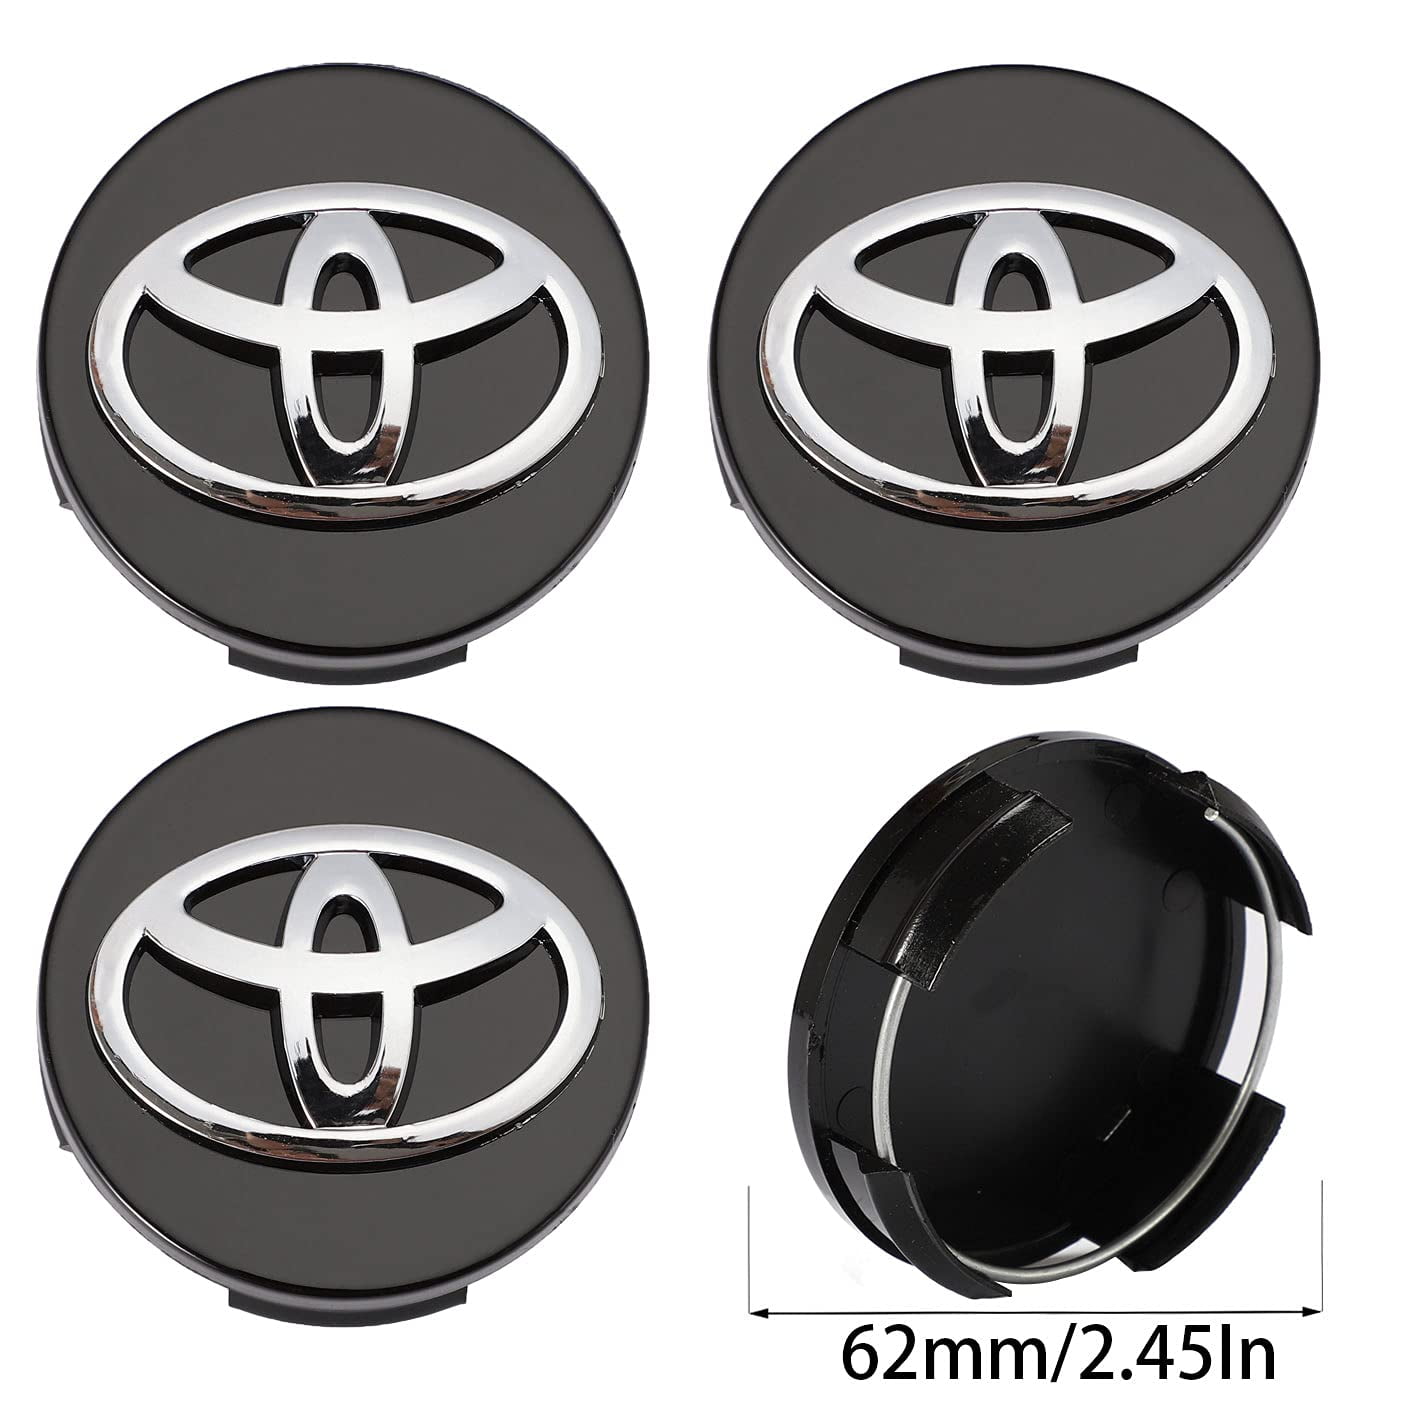 4 Pack Silver 62mm/ 2.44 inch fit Toyota Wheel Center Hub Caps,Hubcaps Logo Covers for Toyota S-62LGG-Toyota-1 